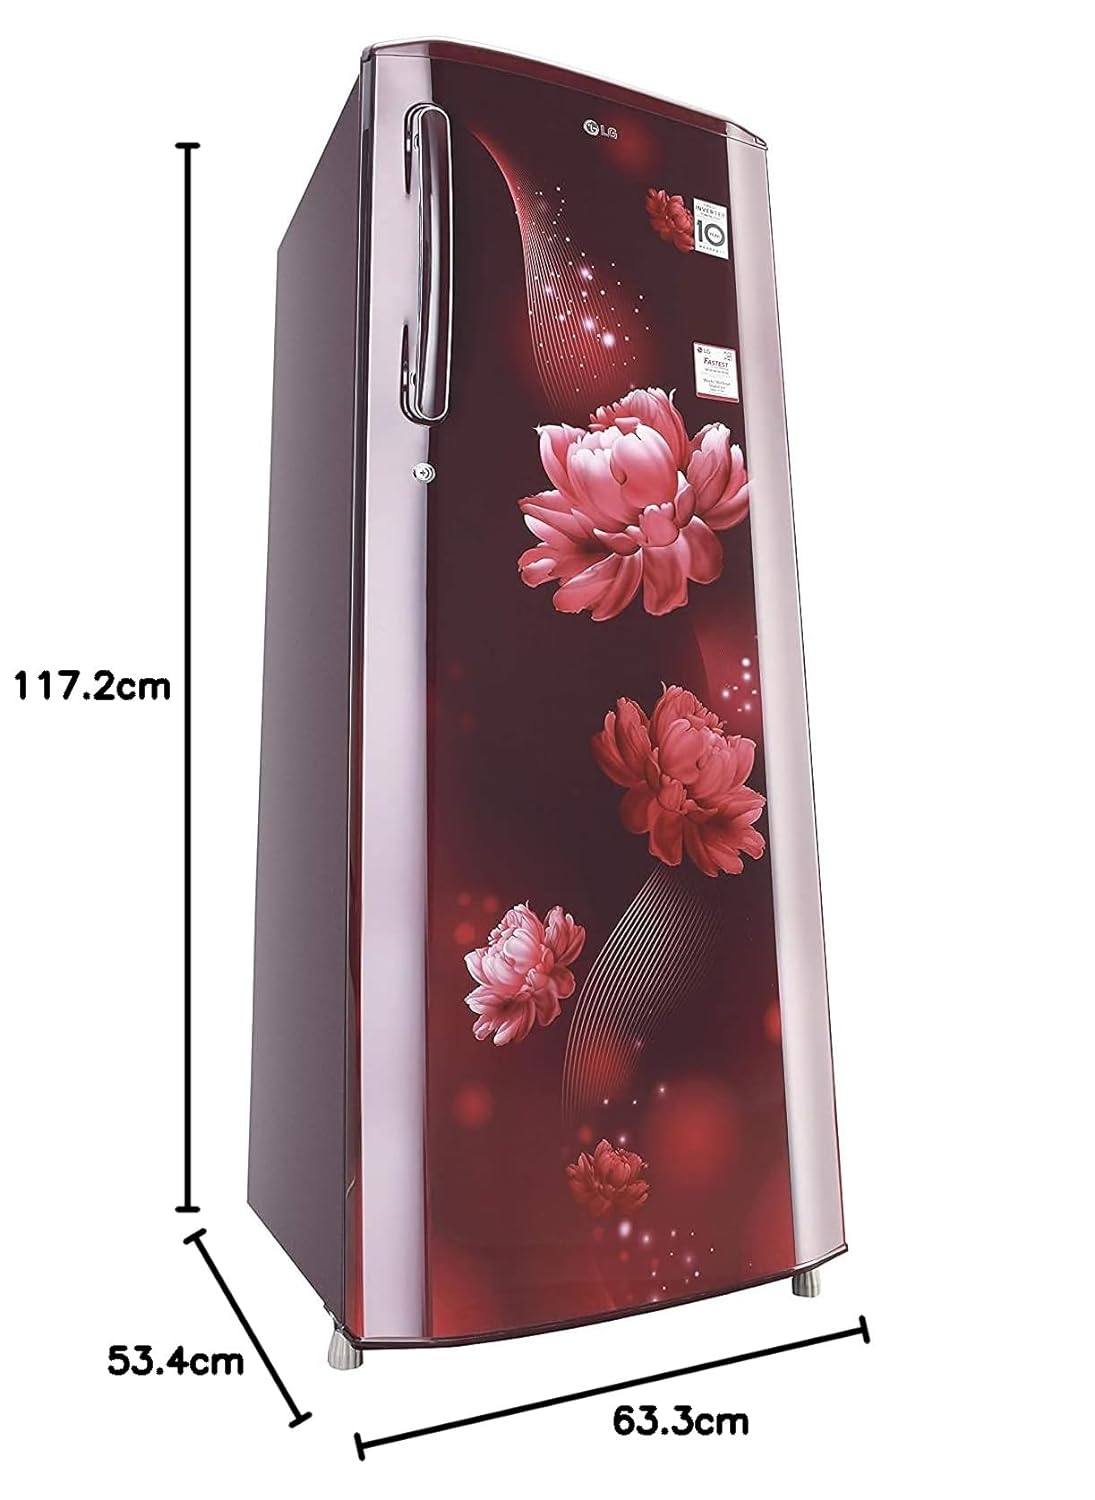 A red LG refrigerator diagram with dimensions